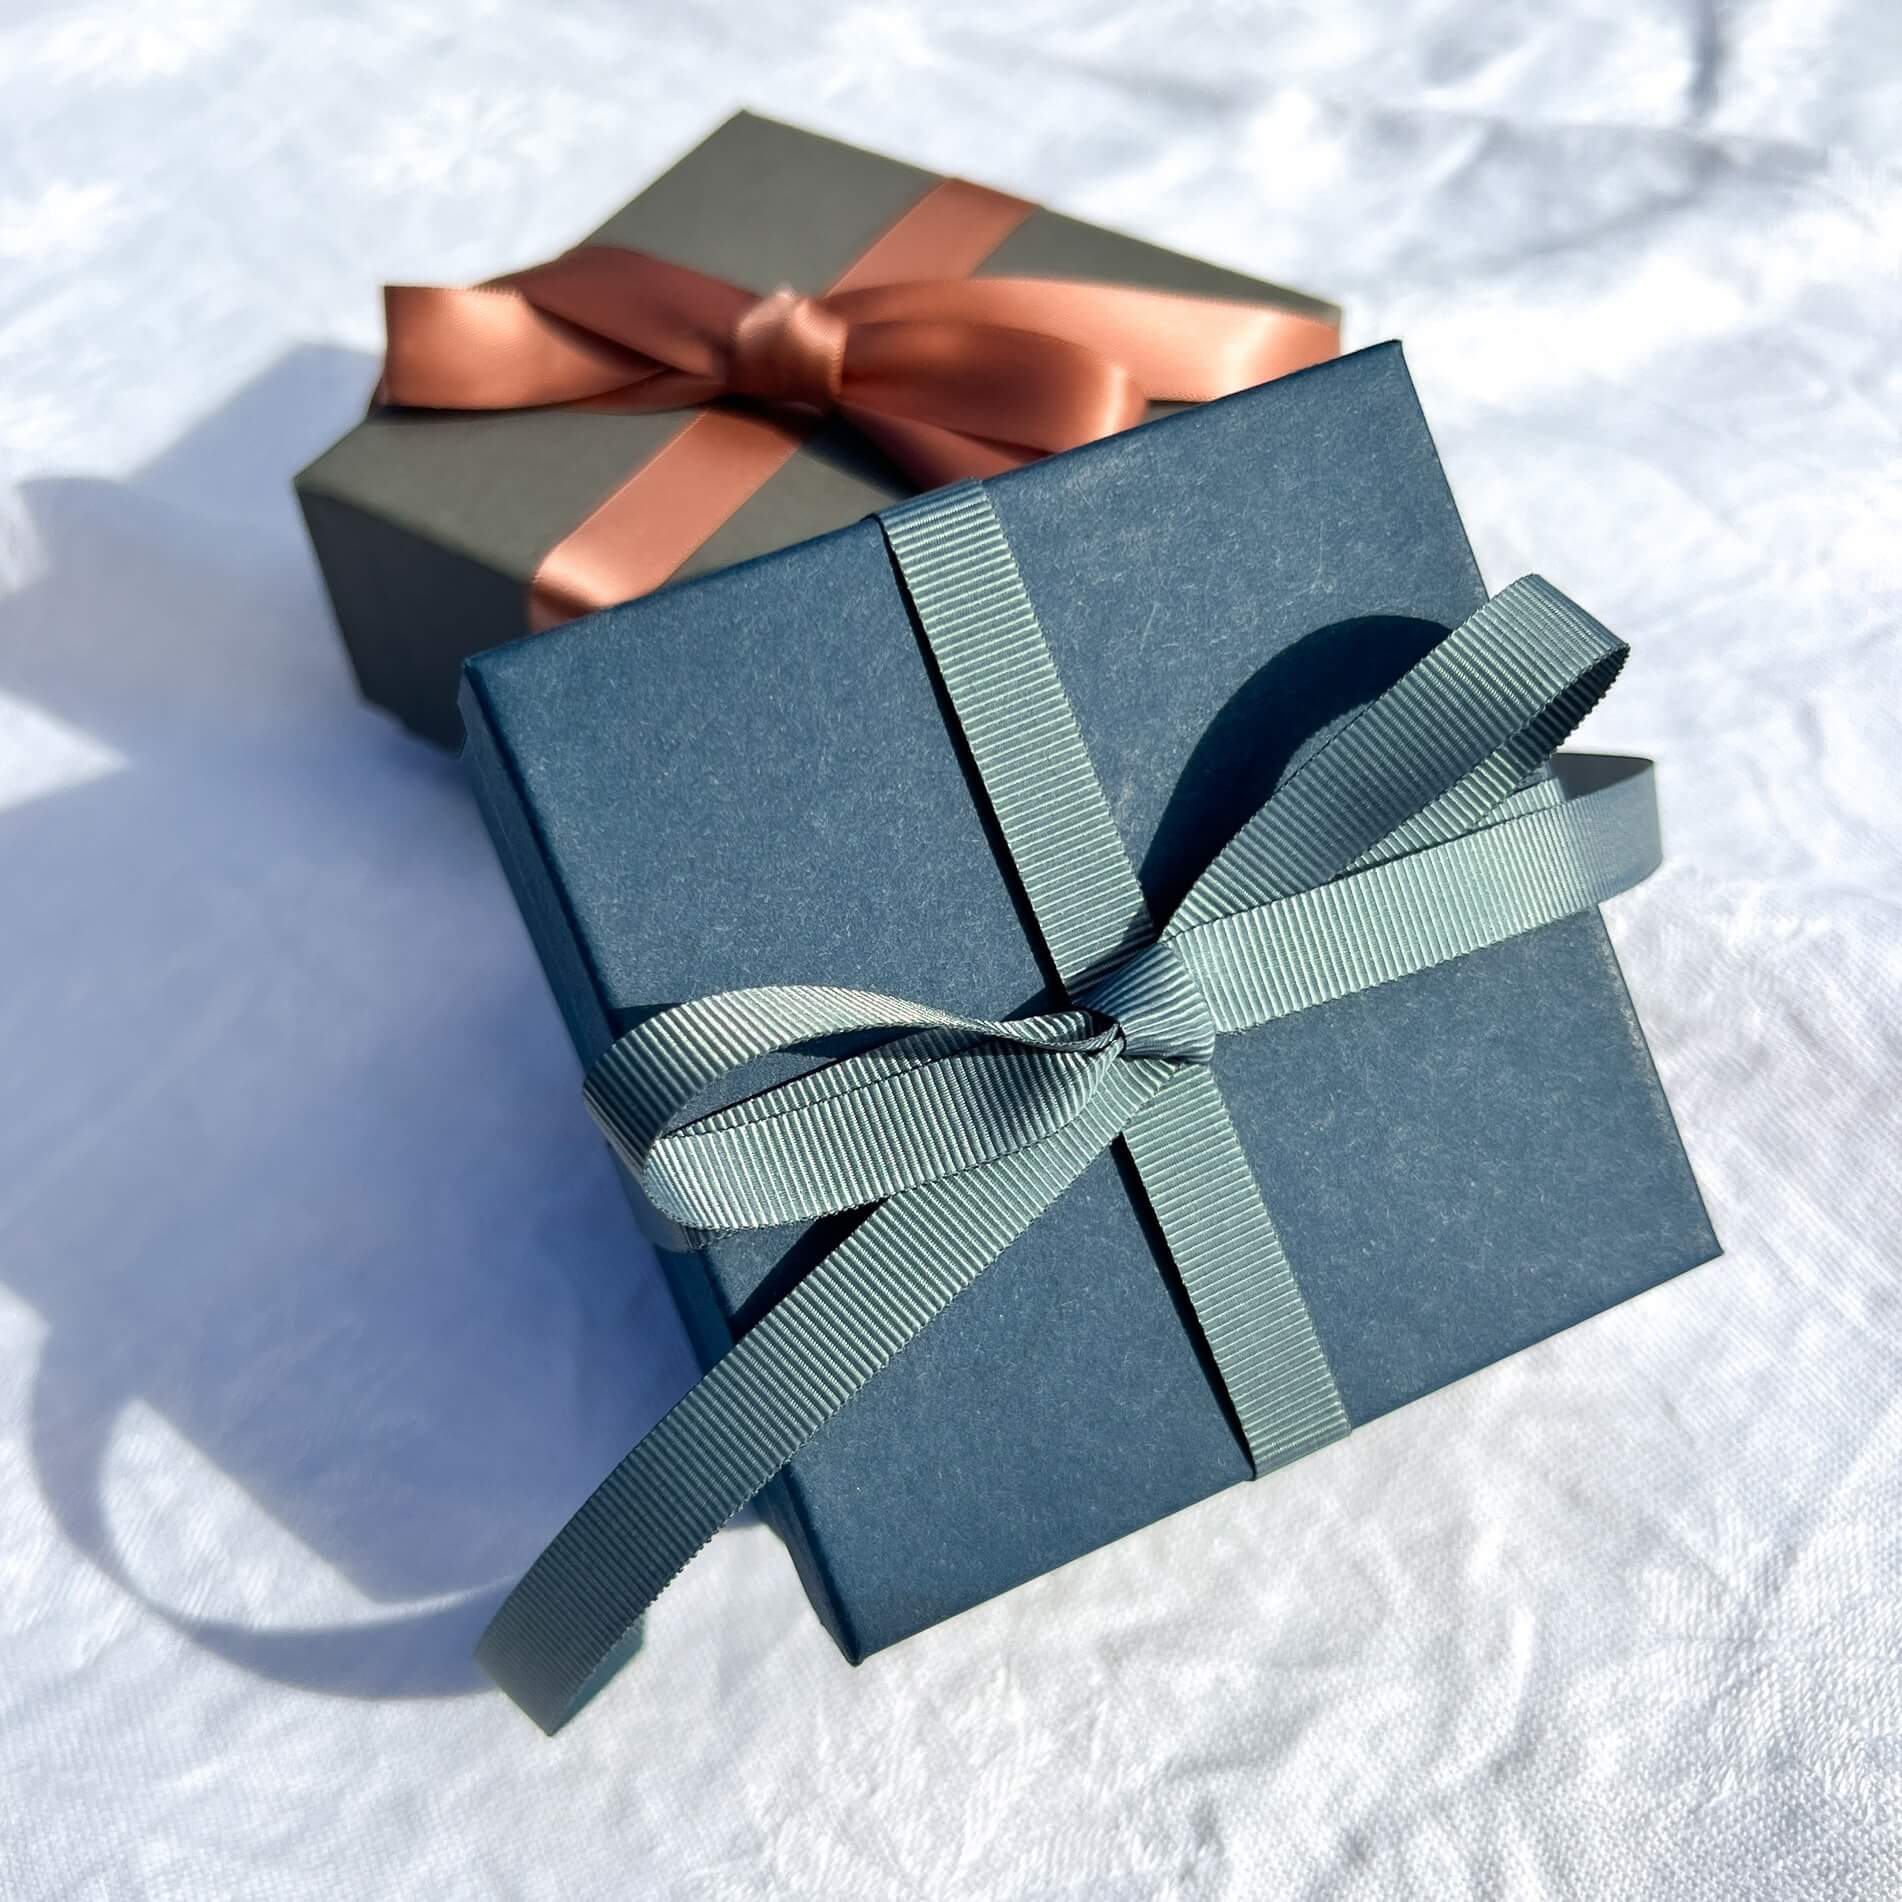 Luxury navy gift box tied in a teal grey ribbon with a grey gift box & pink ribbon in the background